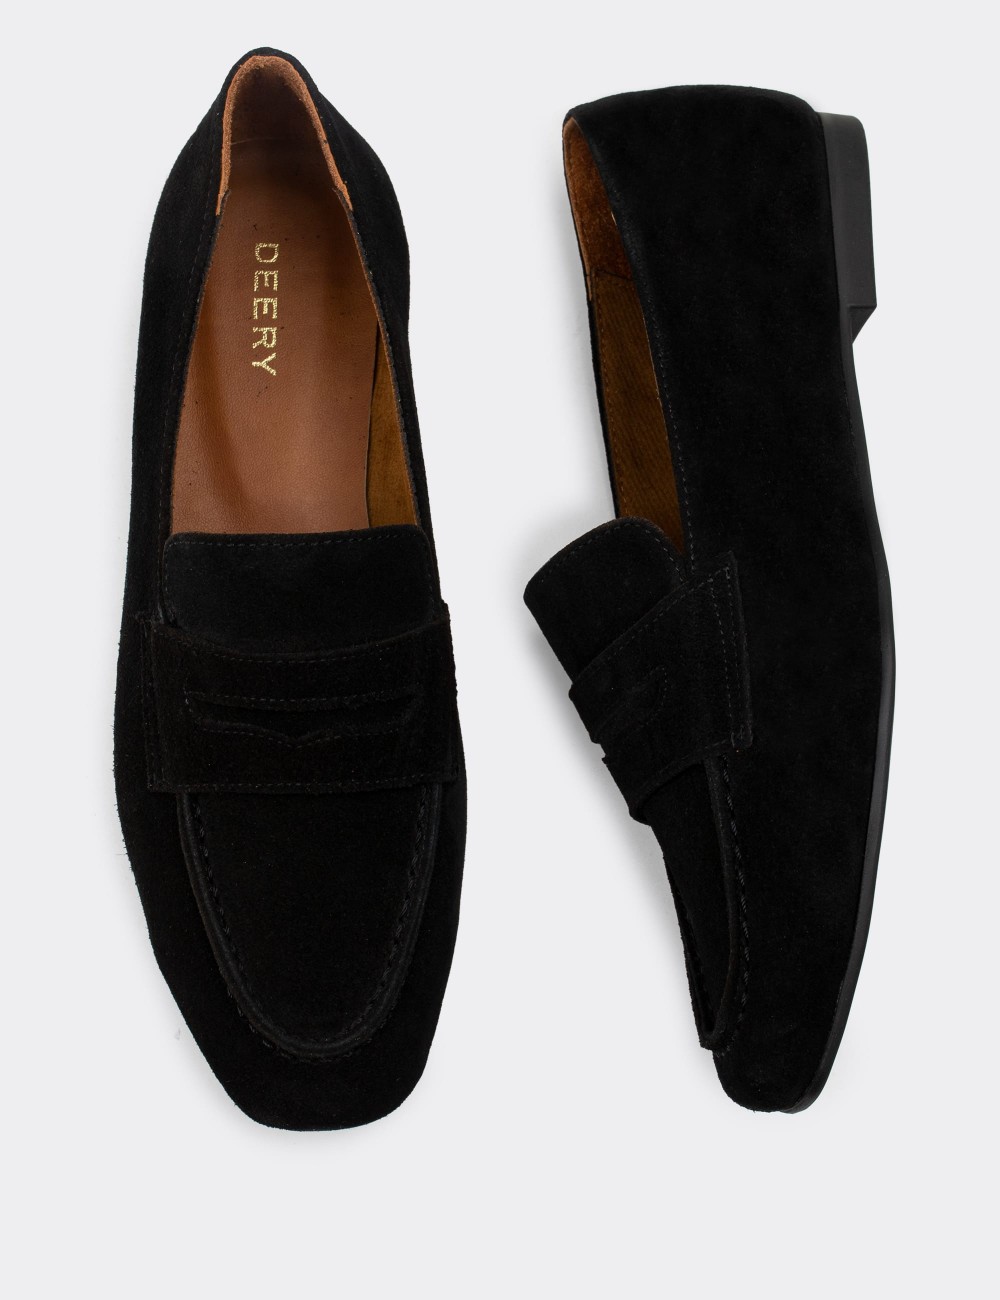 Black Suede Leather Loafers - 01914ZSYHC01